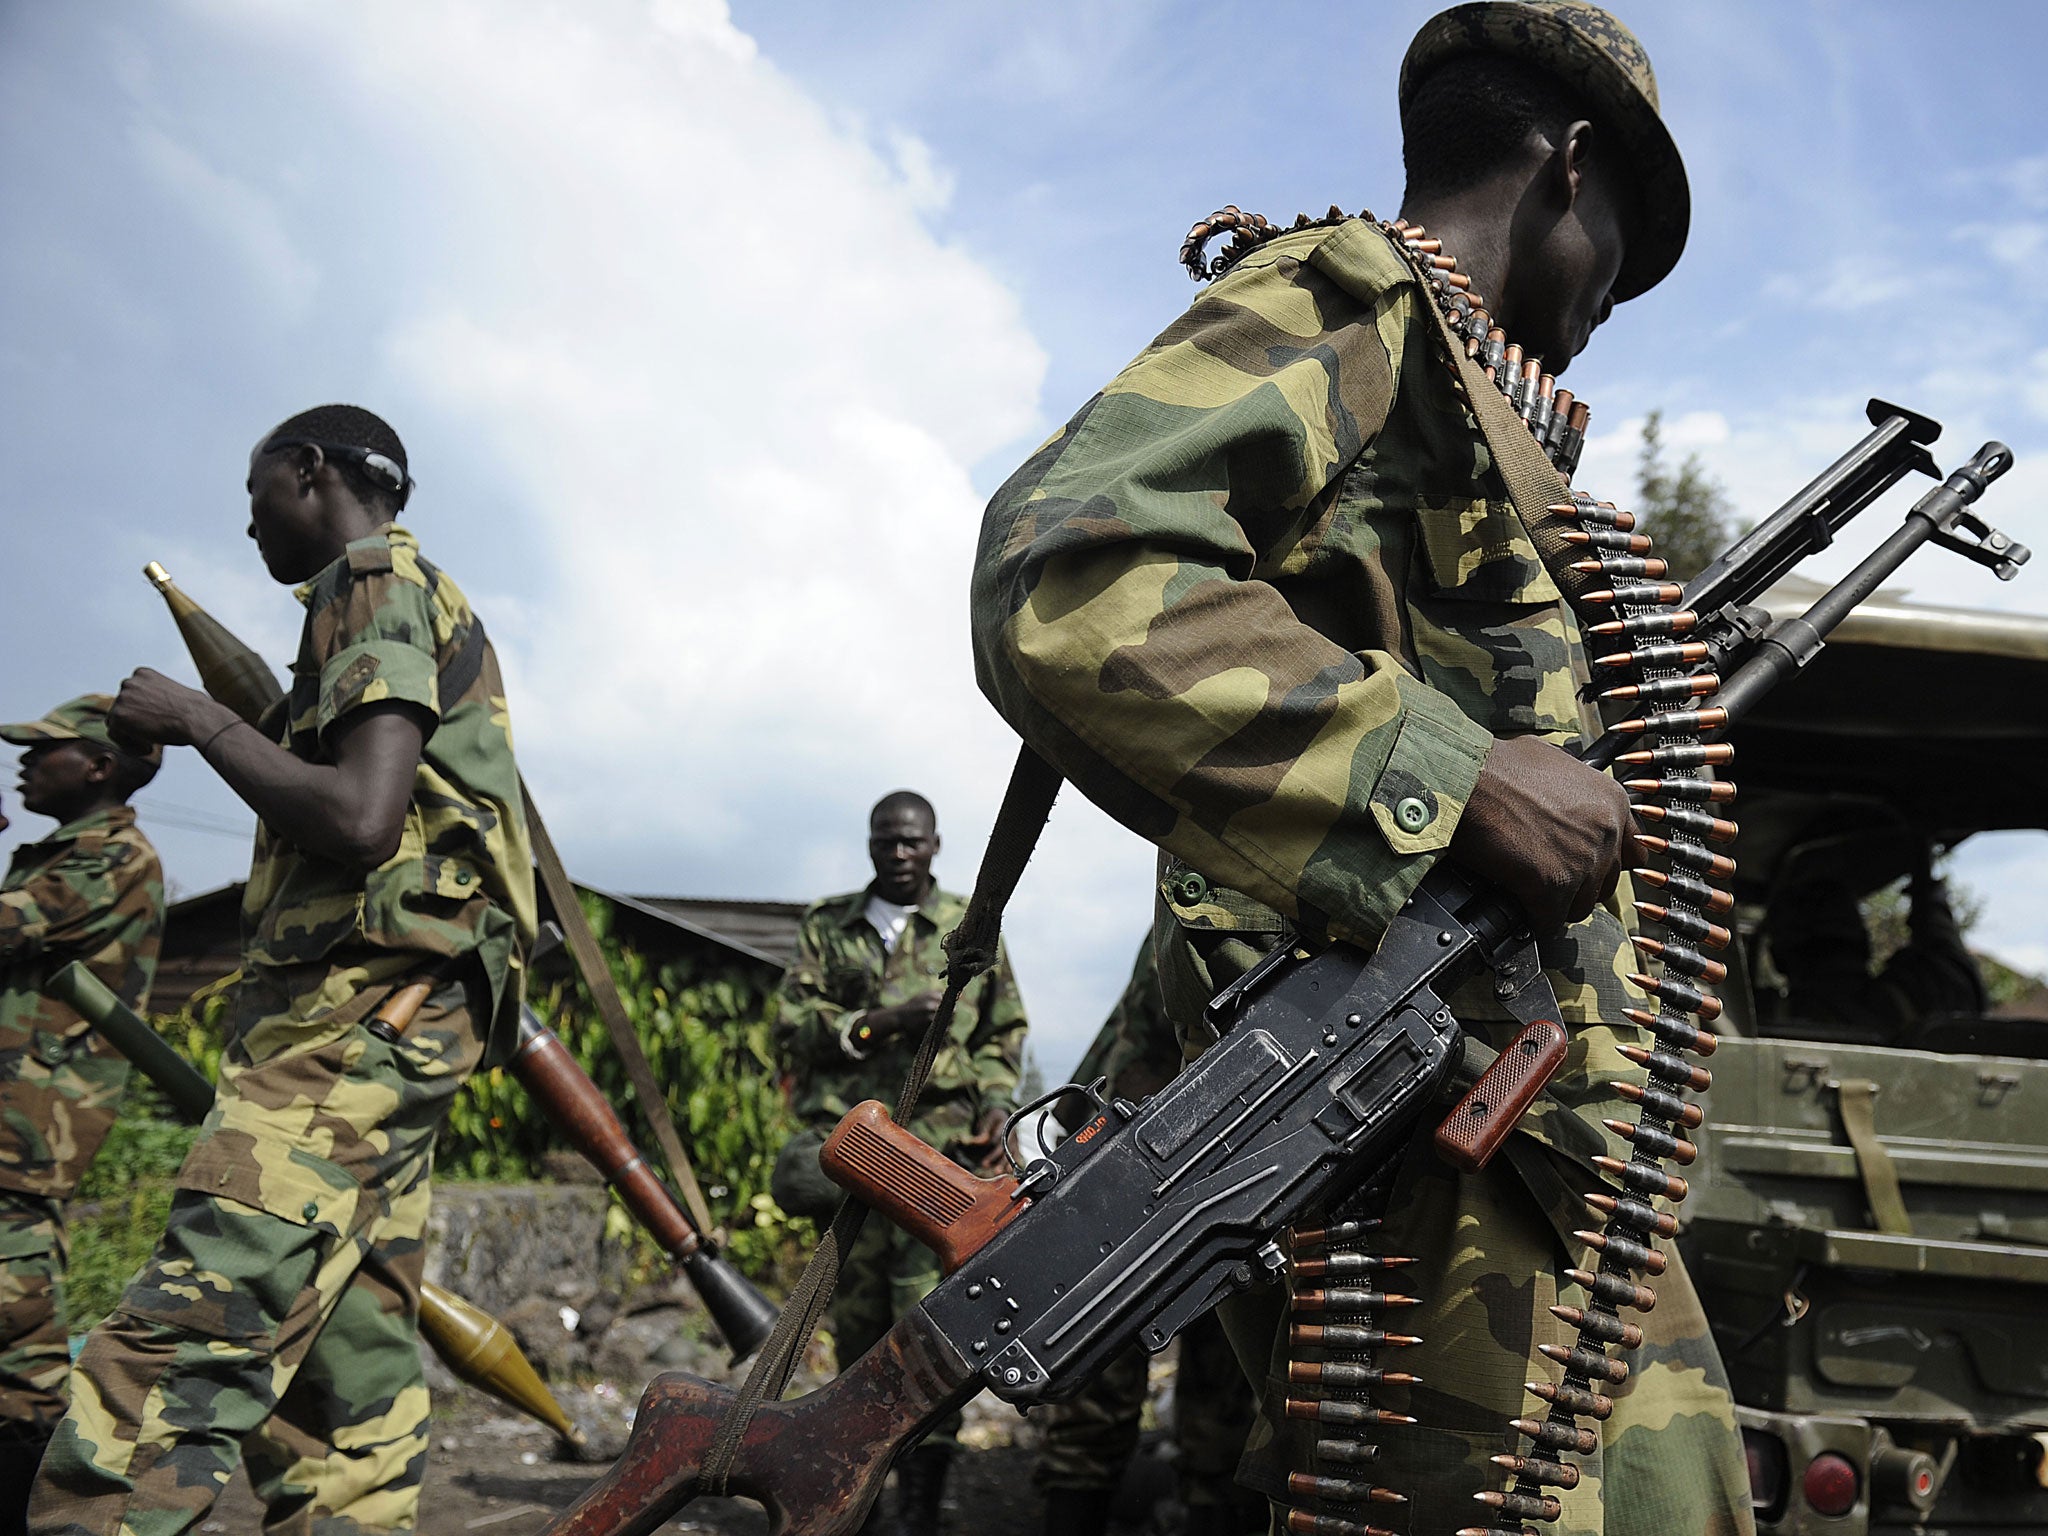 Congolese M23 rebels in Goma in 2012